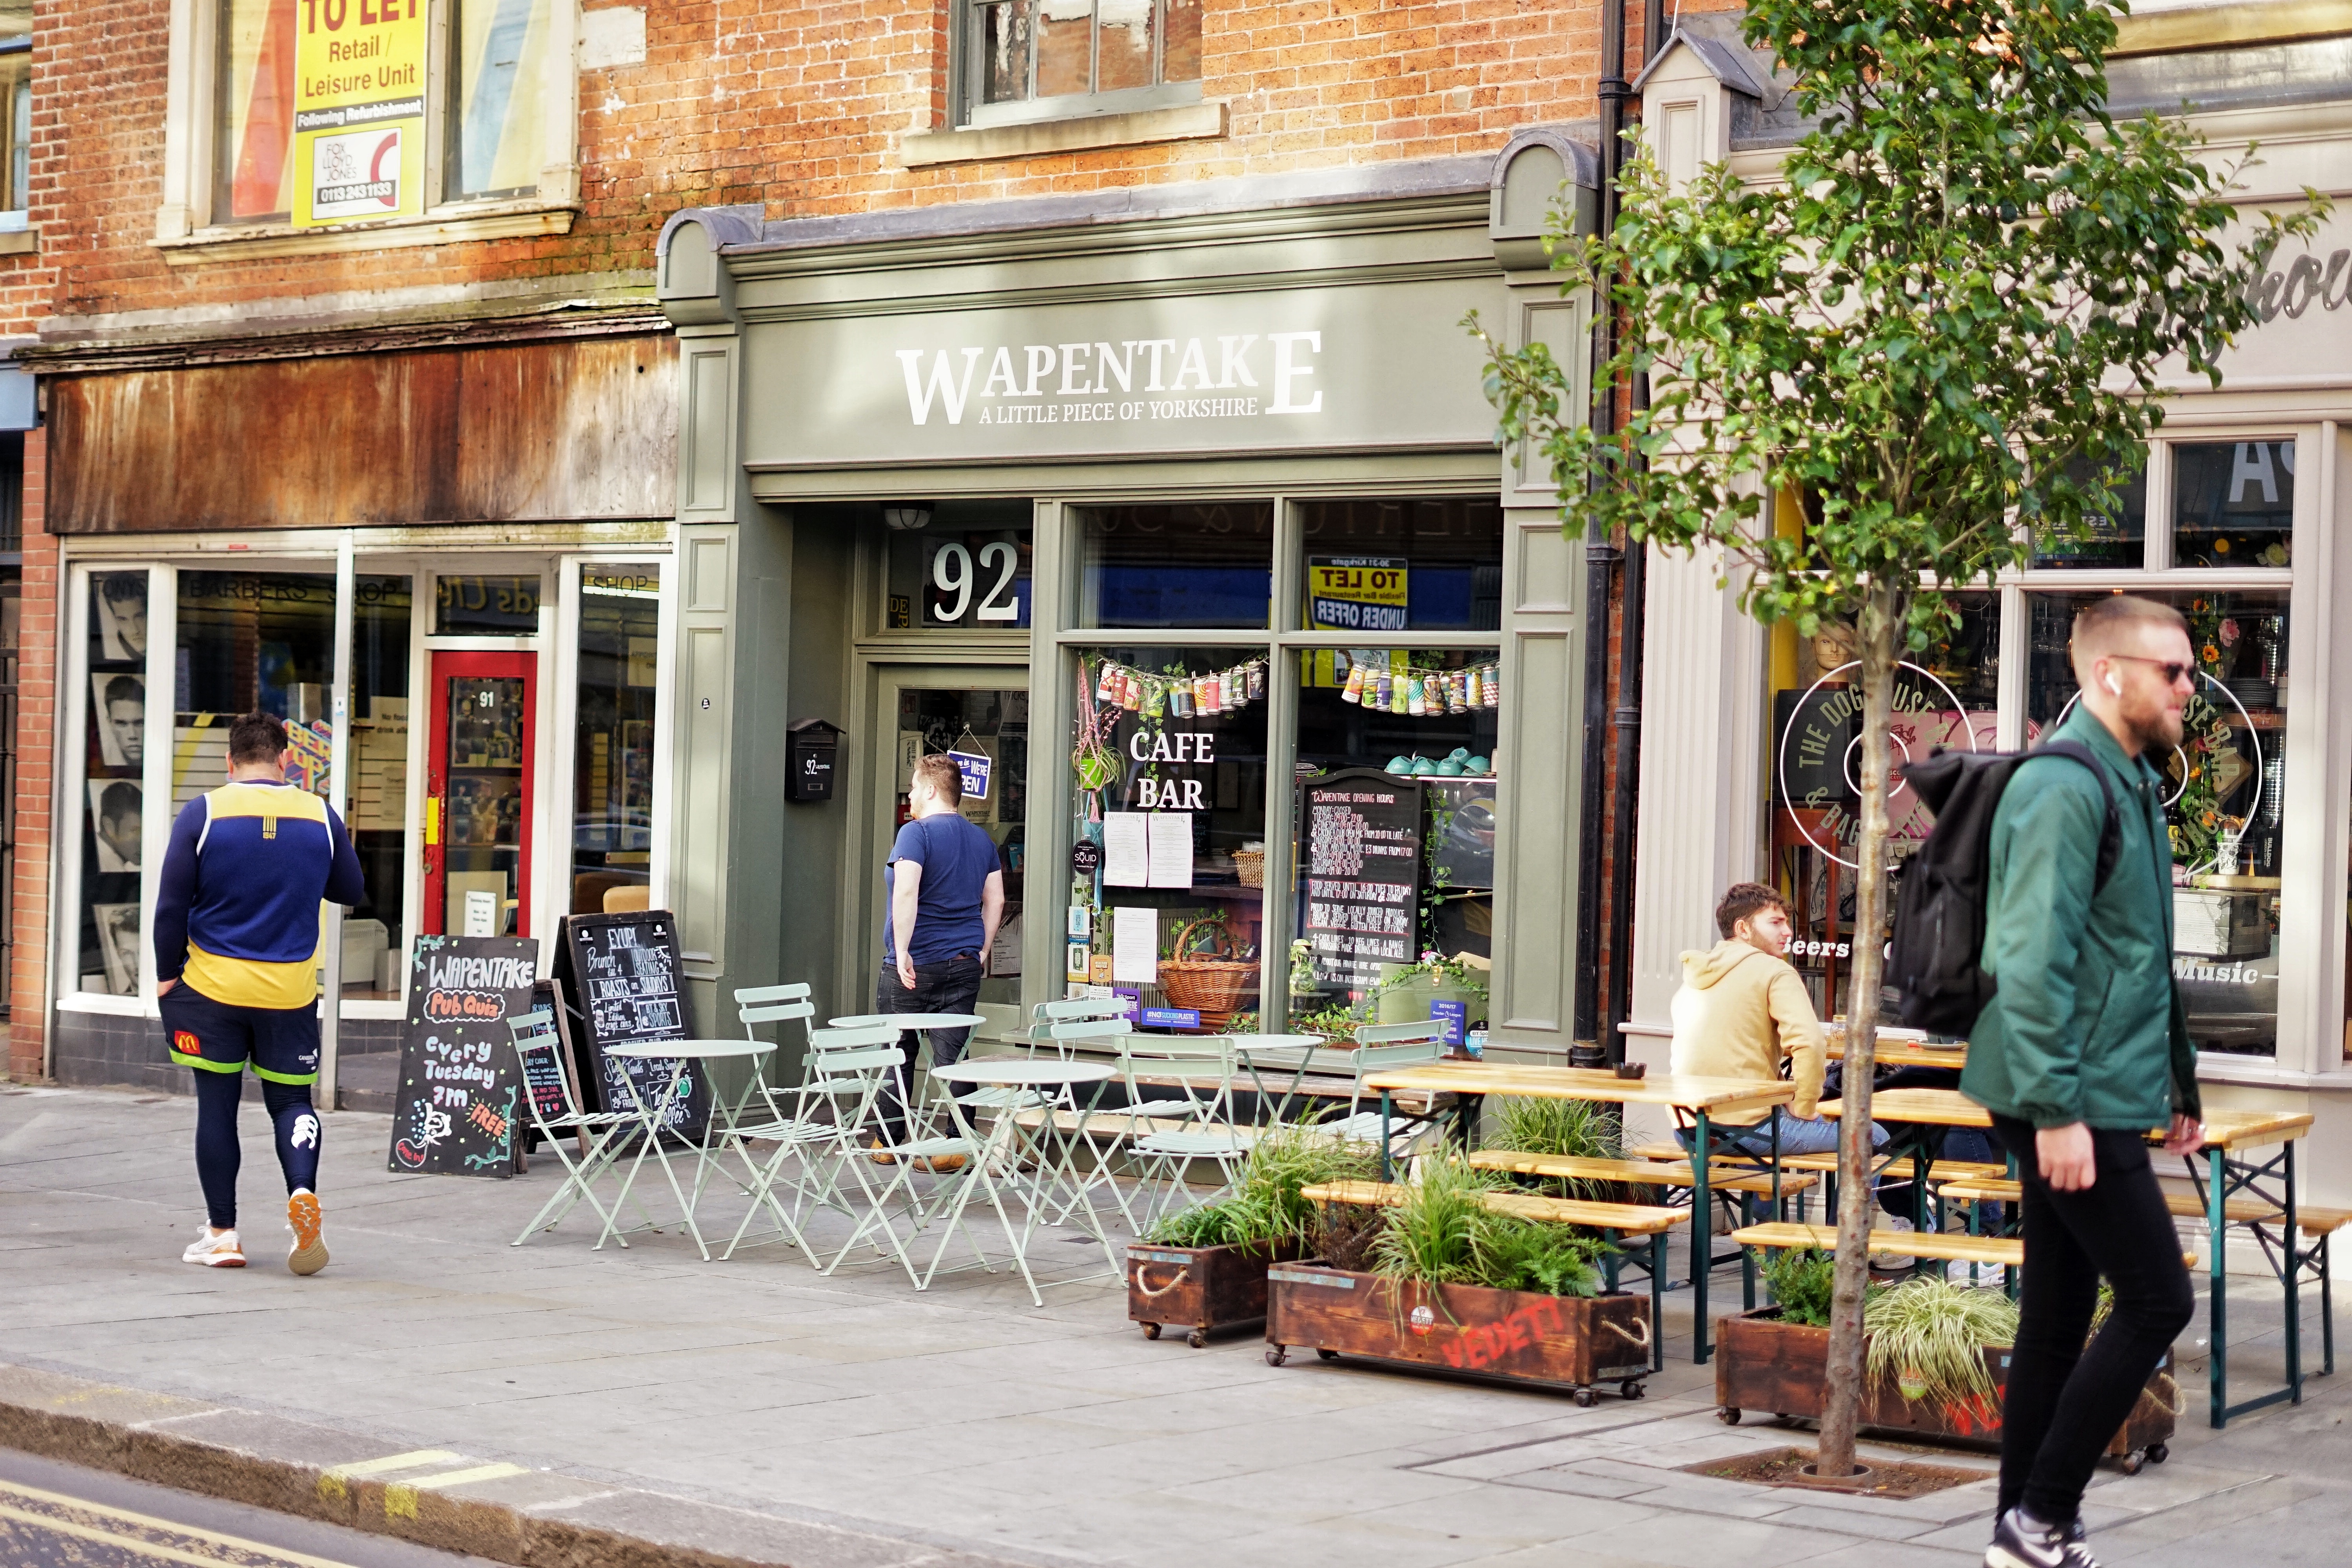 HAVE YOU BEEN TO WAPENTAKE?